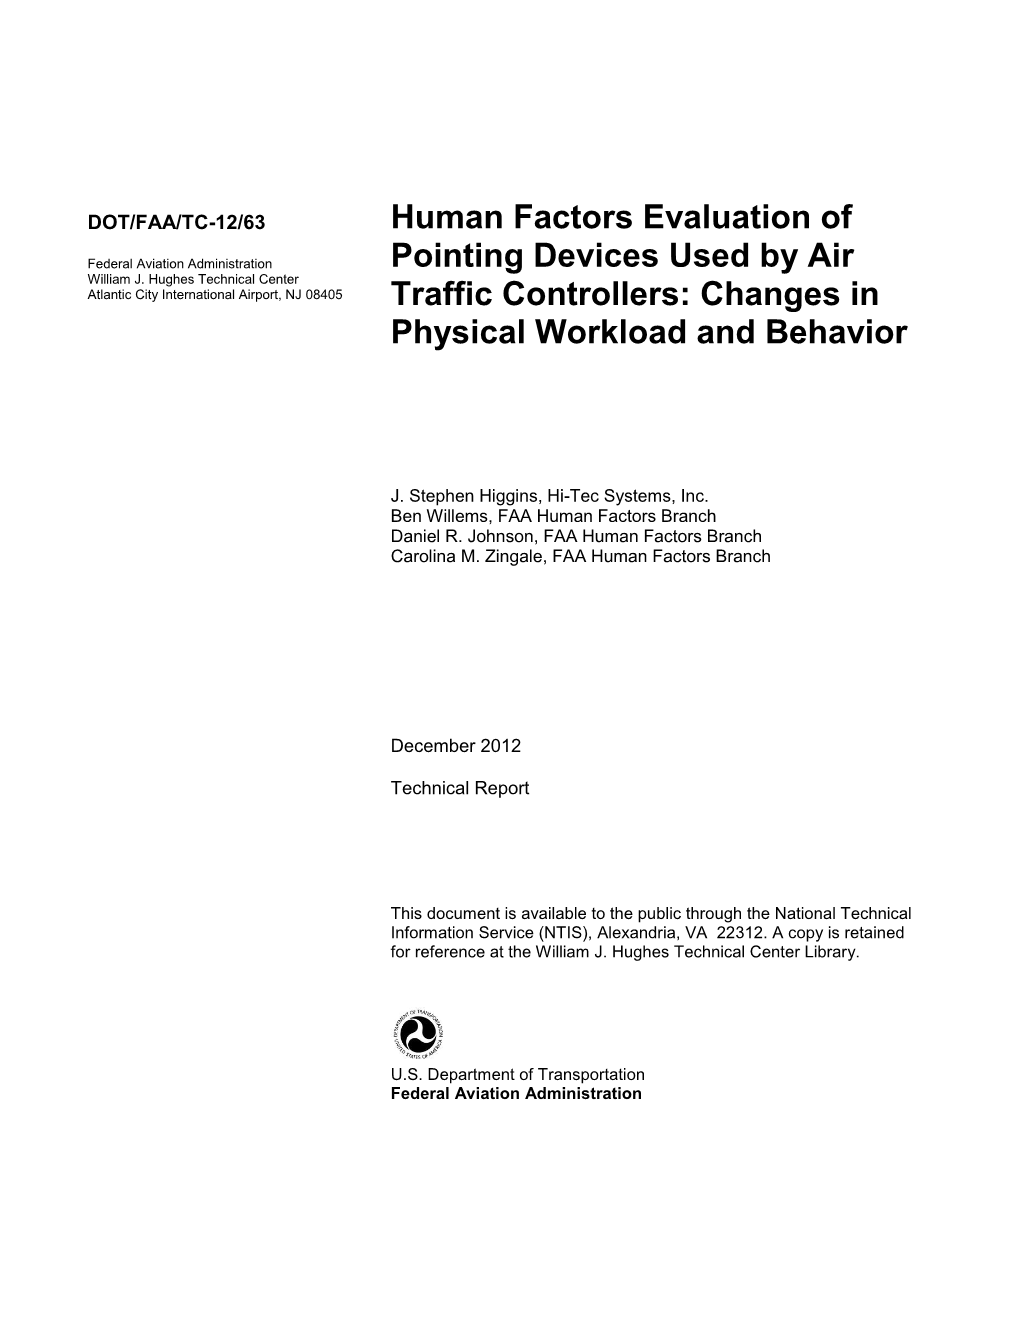 Human Factors Evaluation of Pointing Devices Used by Air Traffic Controllers: Changes in December 2012 Physical Workload and Behavior 6